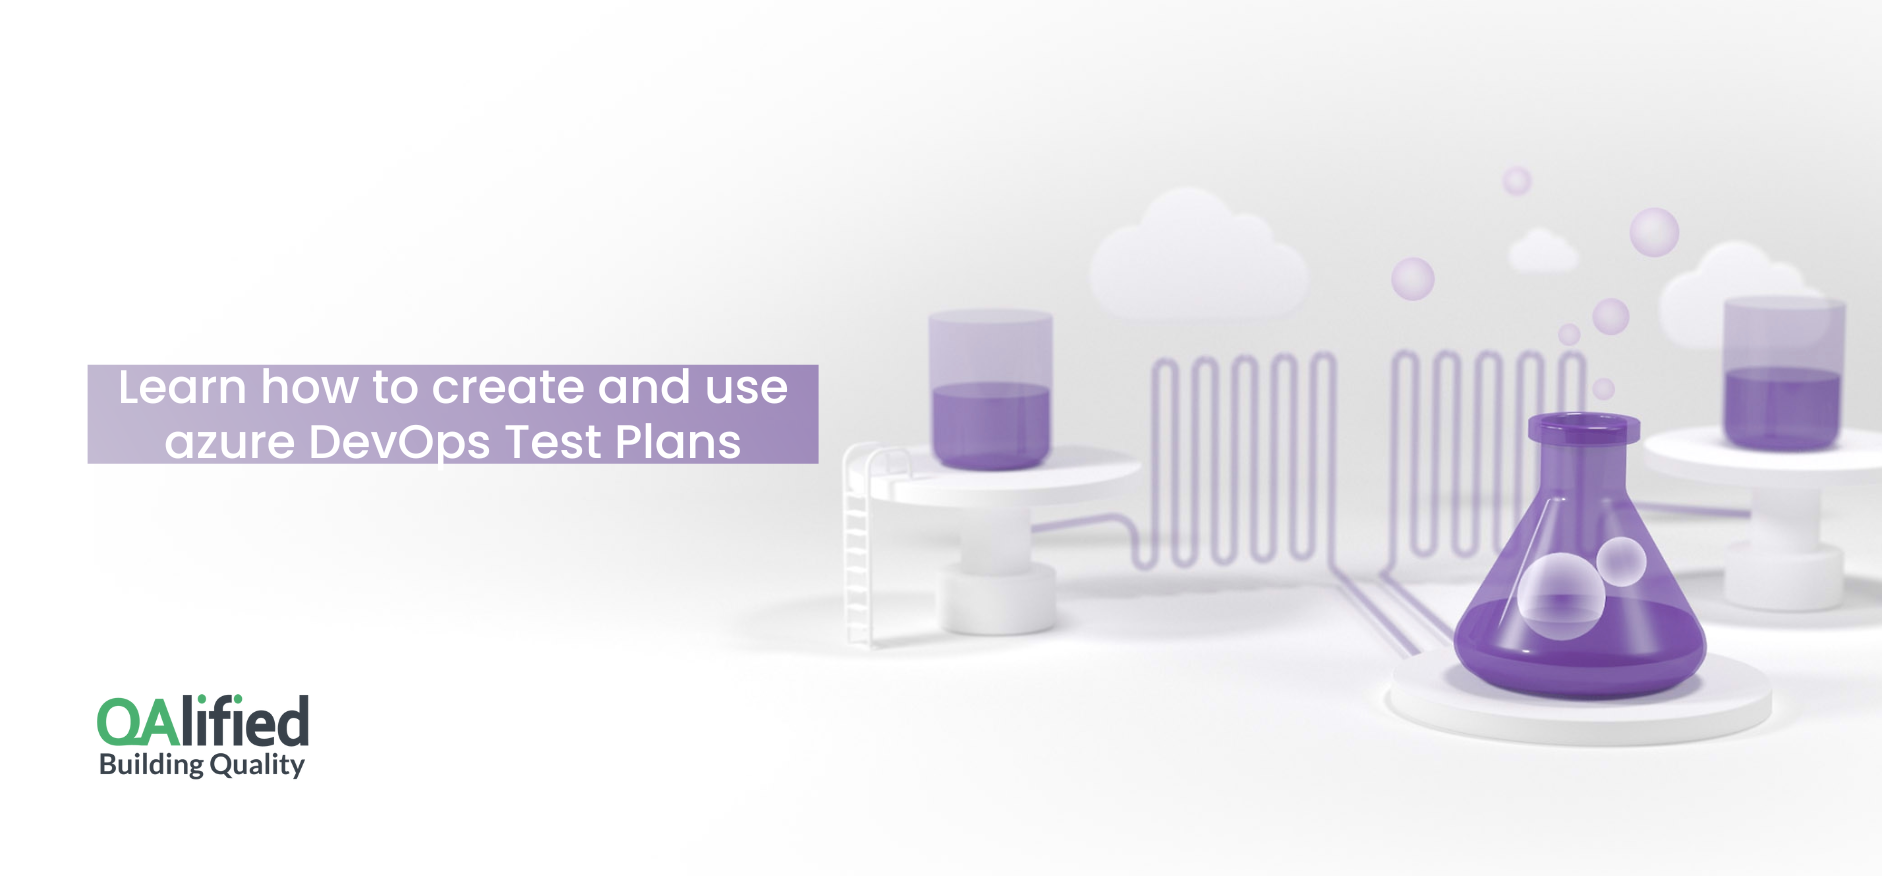 Learn how to create and use azure DevOps Test Plans